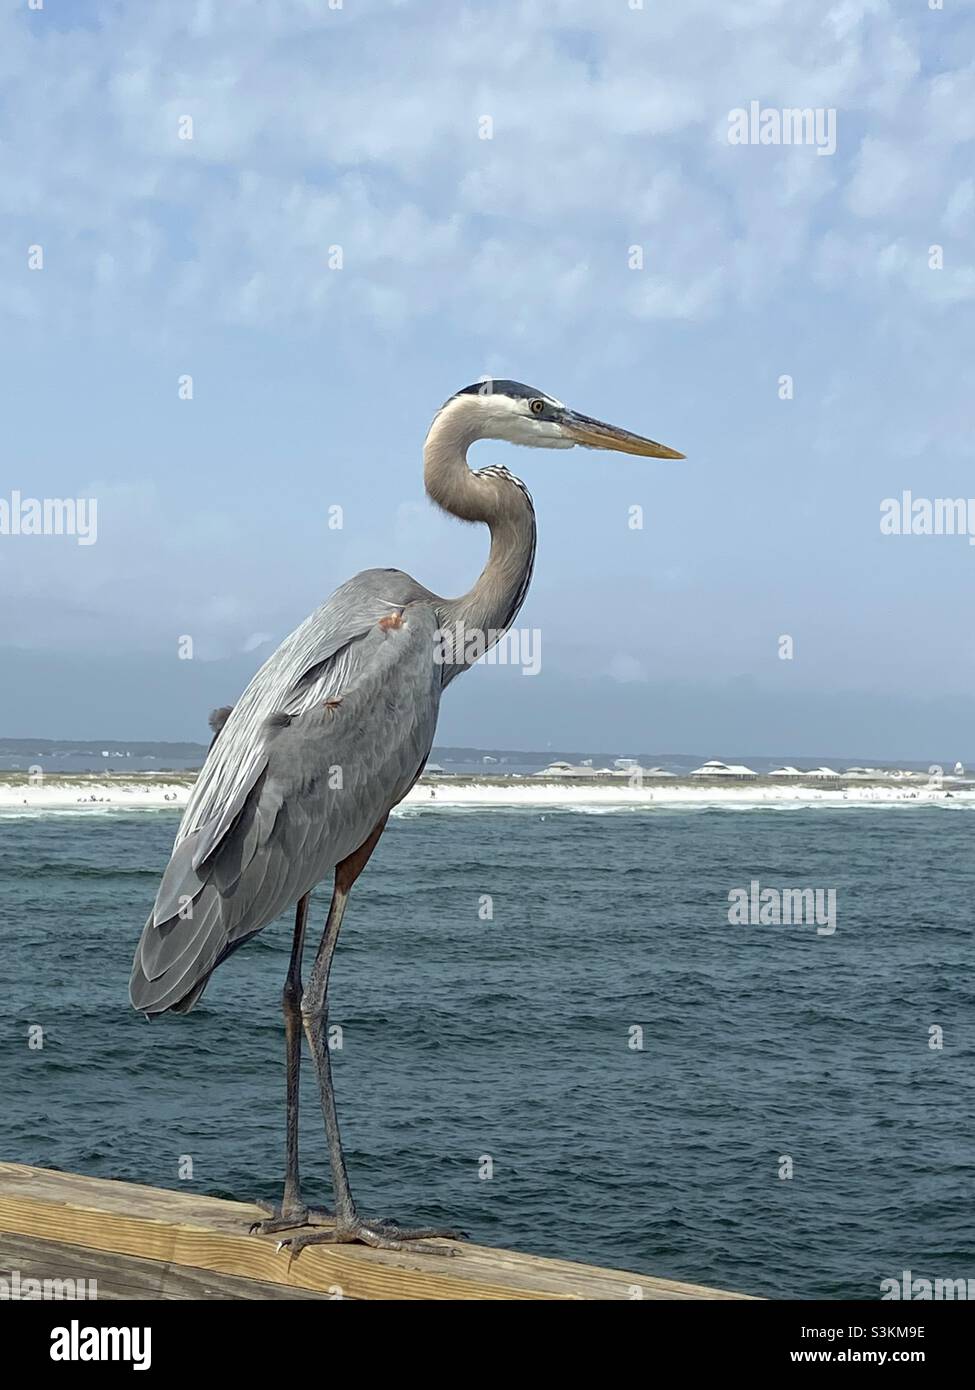 Large whooping crane by the ocean, beach front. Stock Photo